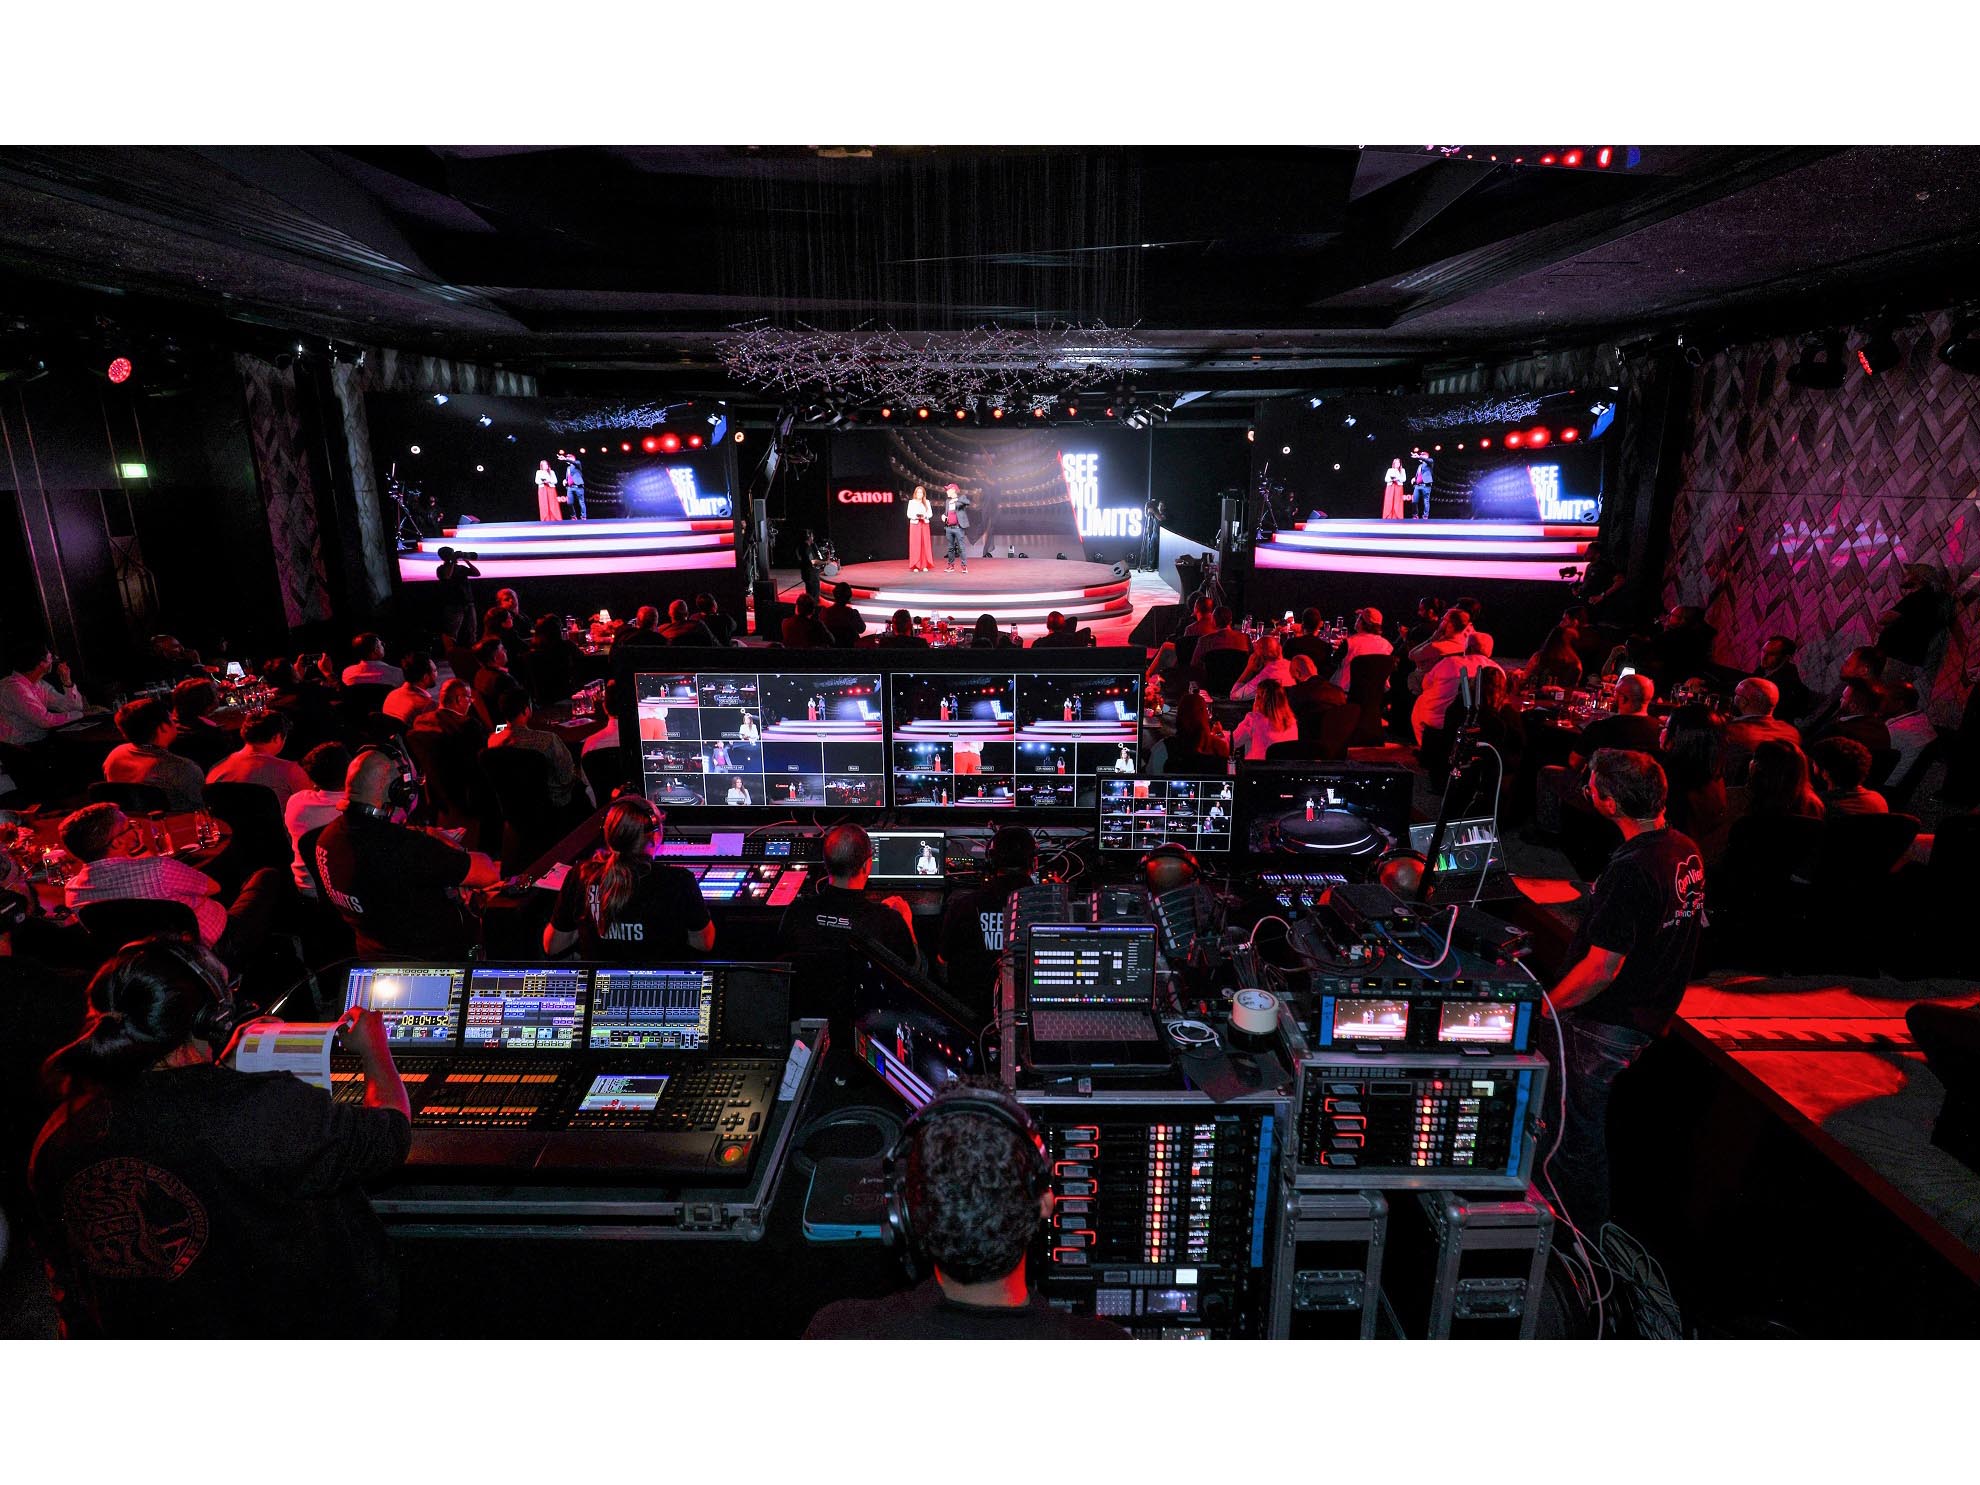 Canon's 'See No Limits’ event empowers the region's production and broadcasting industry